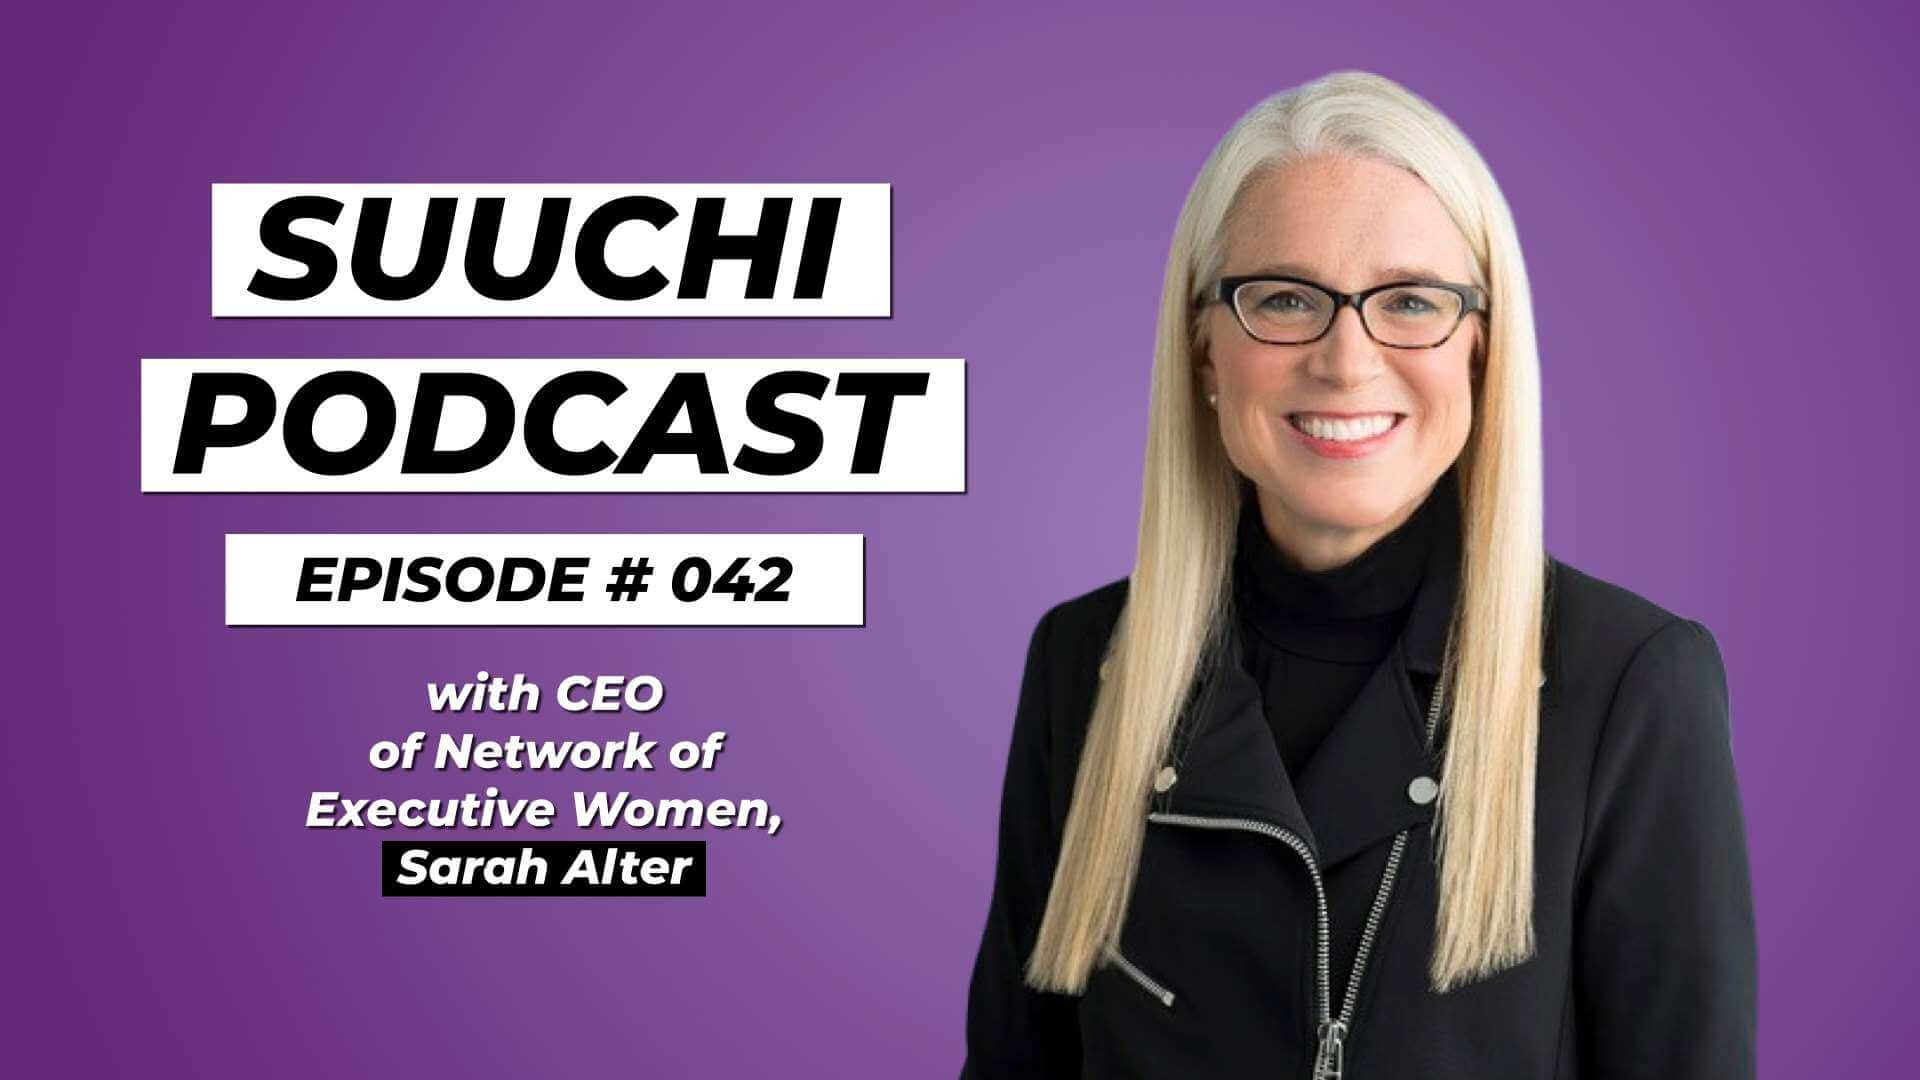 Suuchi Podcast #42: Sarah Alter, CEO of Network of Executive Women